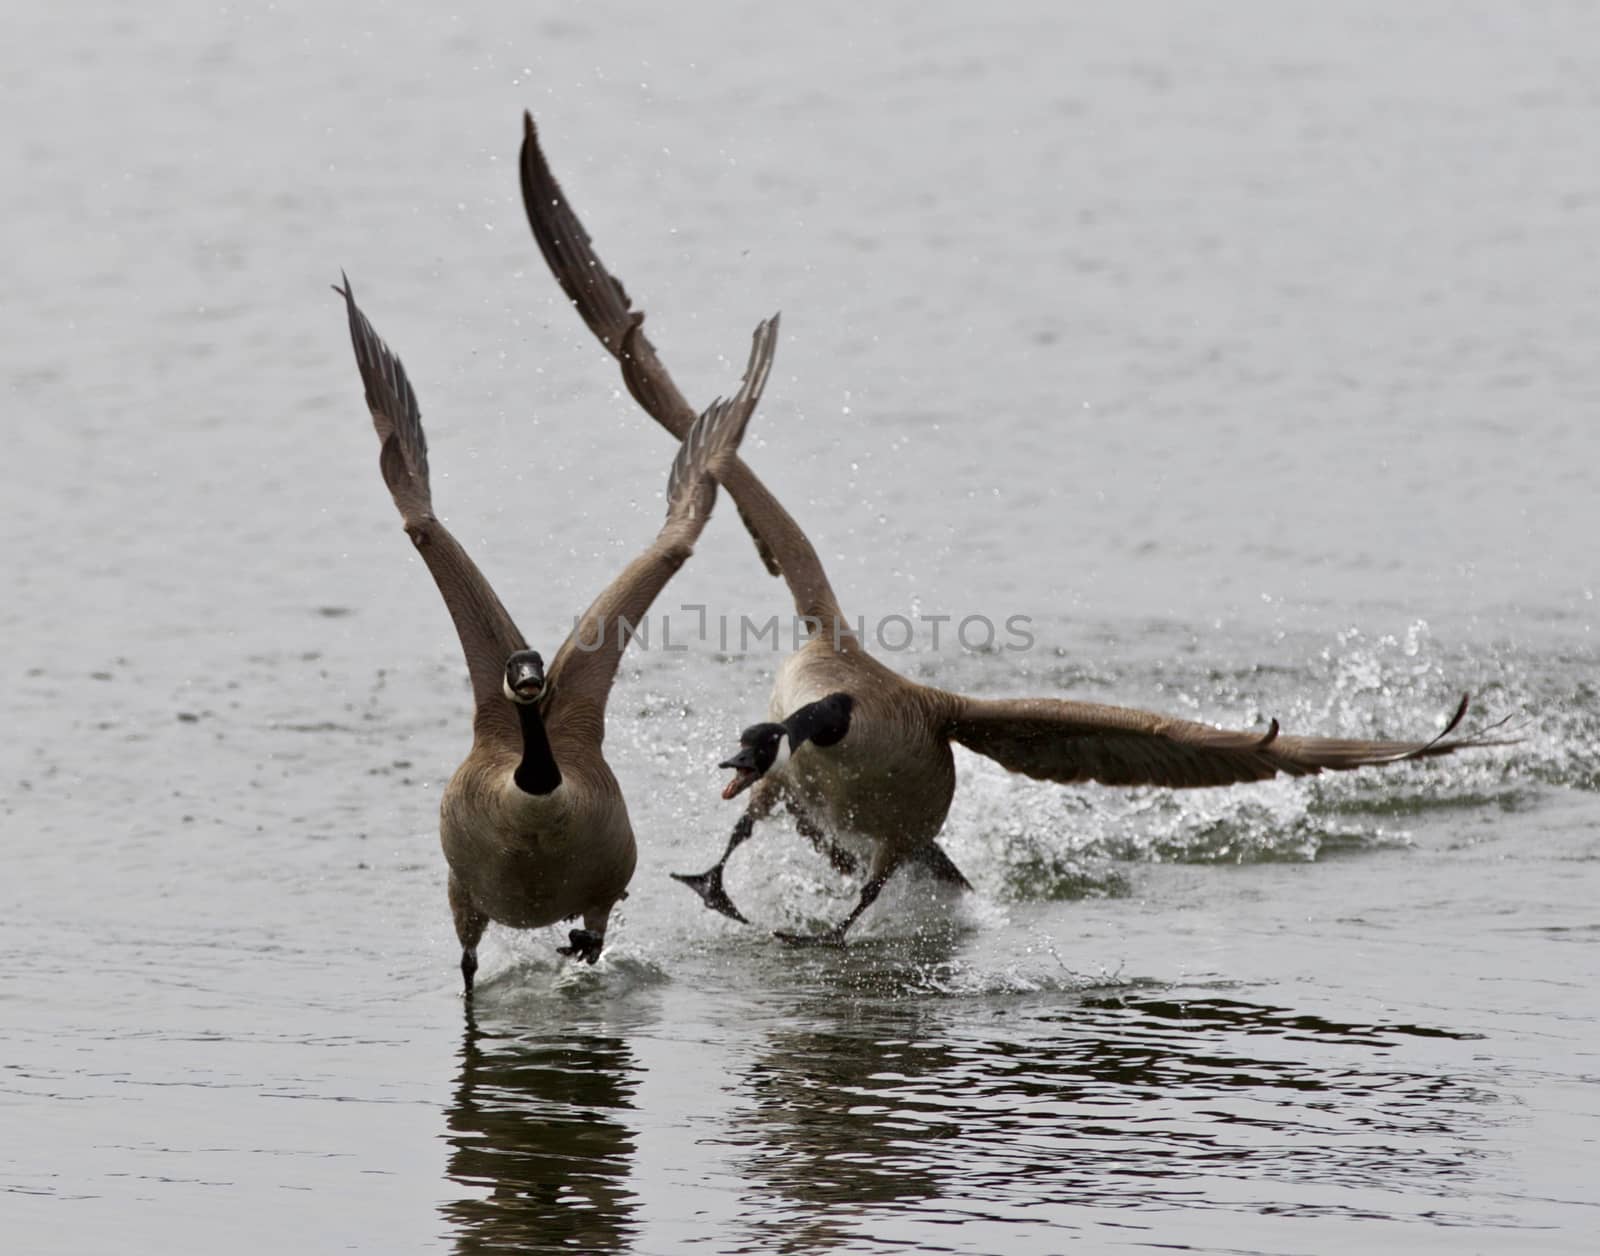 Expressive isolated image with the Canada goose chasing his rival on the lake